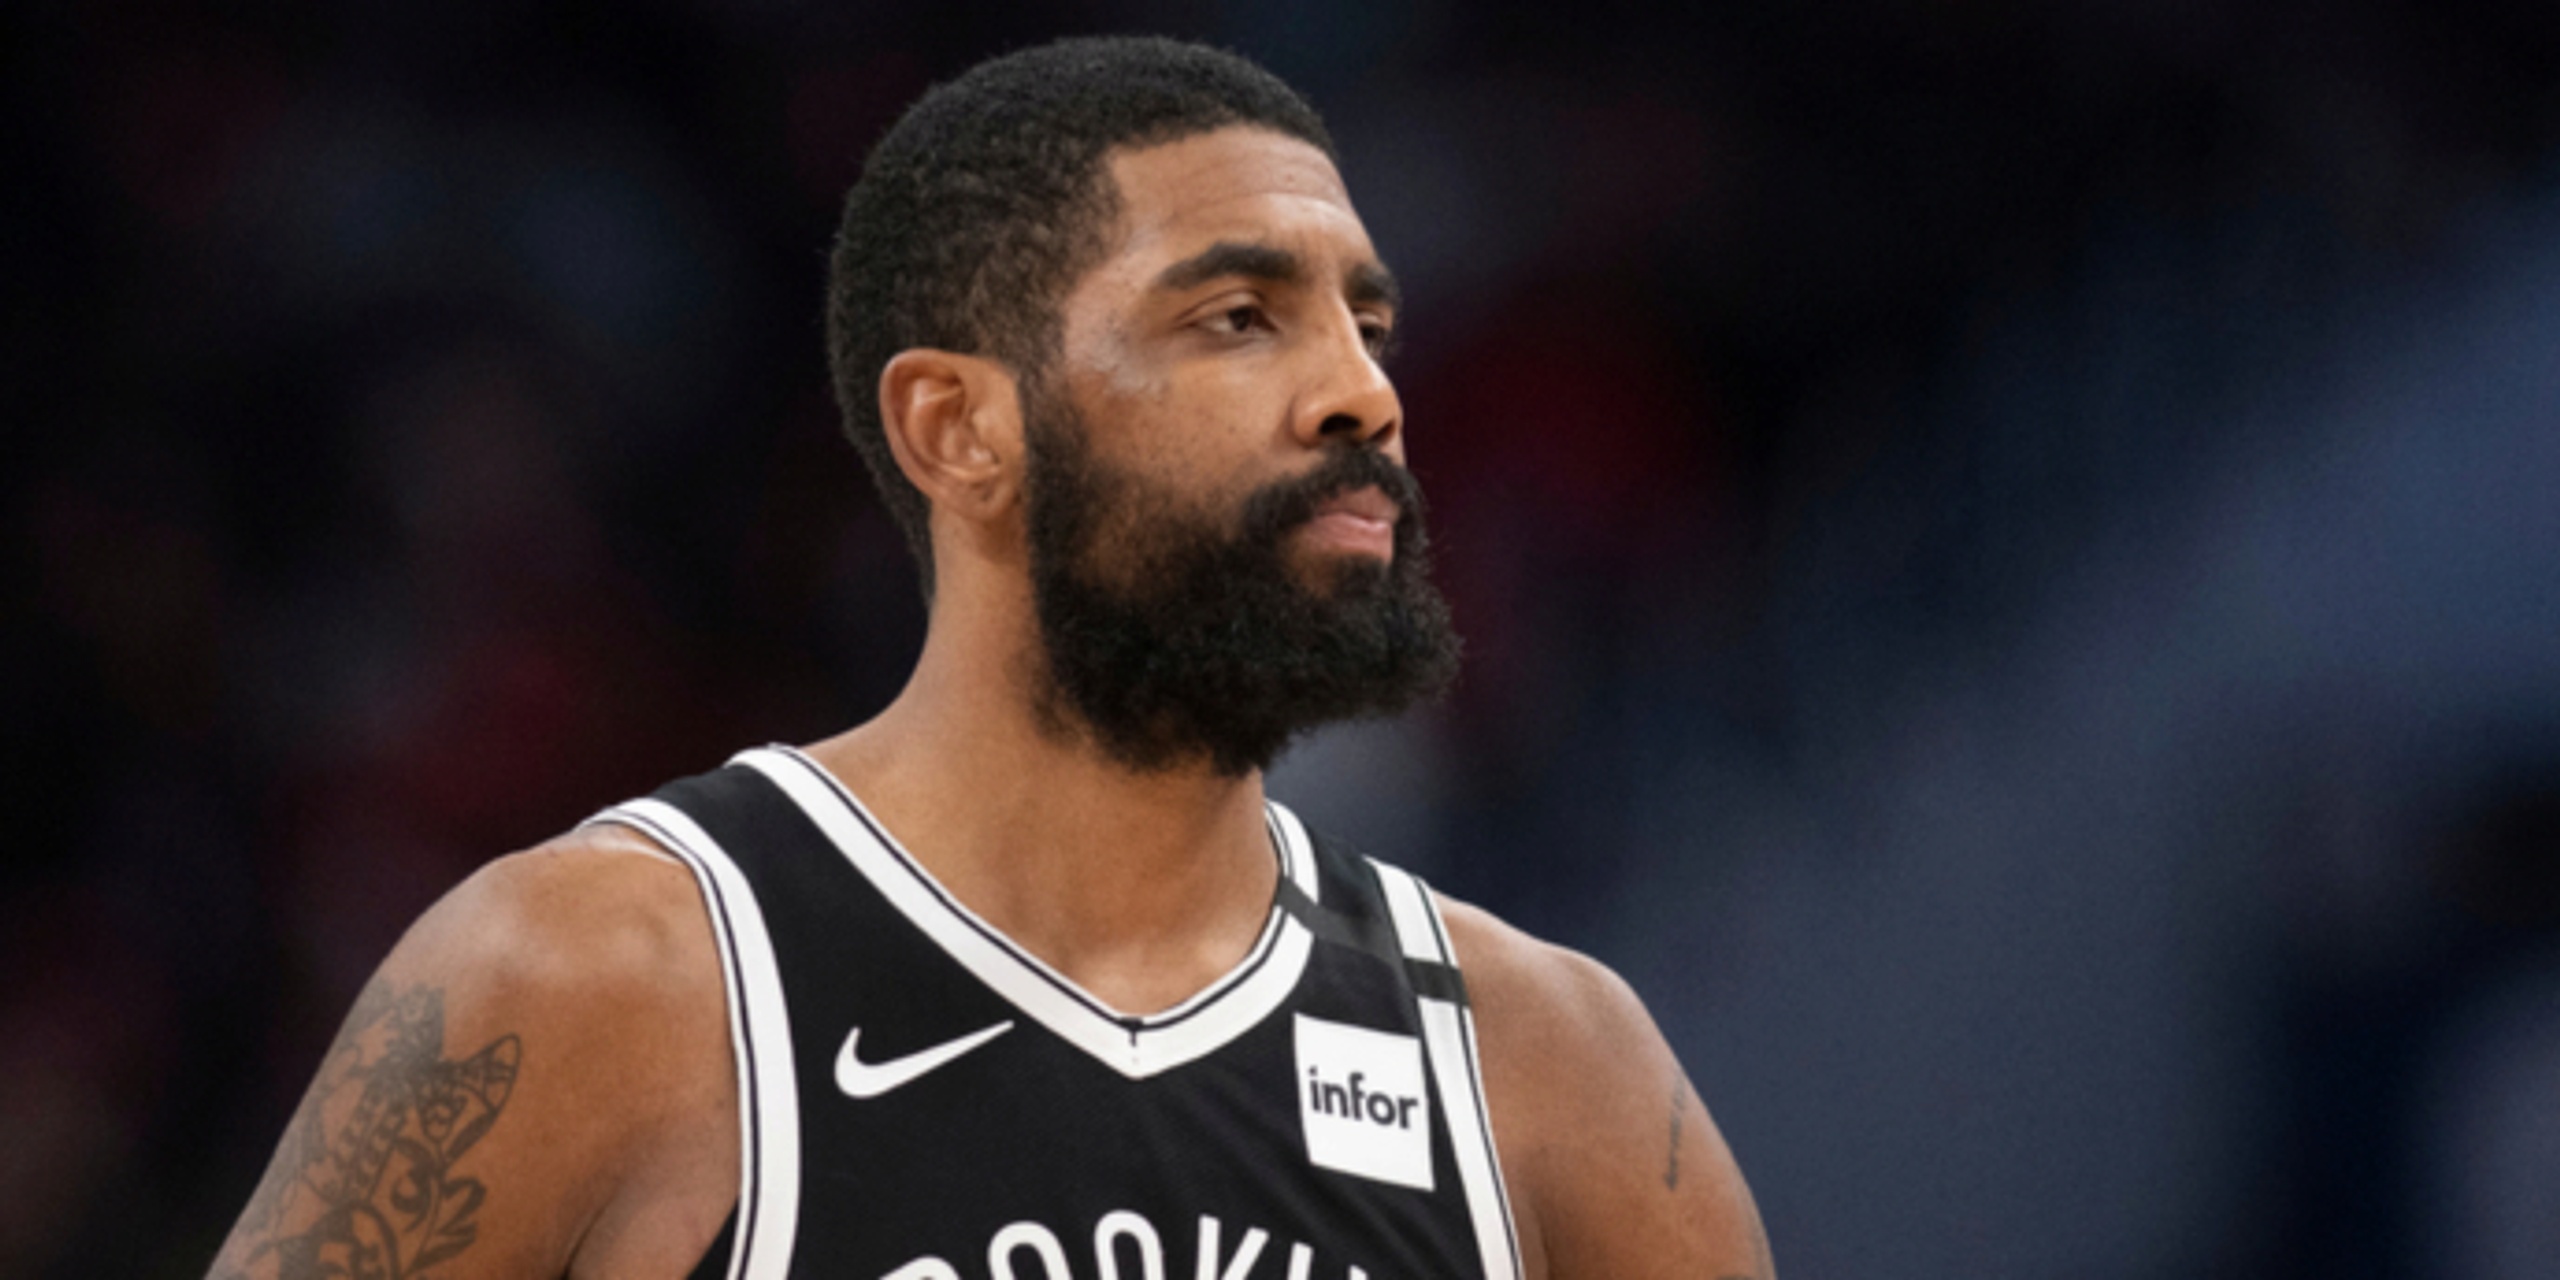 Kyrie Irving discusses Coach Nash, Harden rumors, more